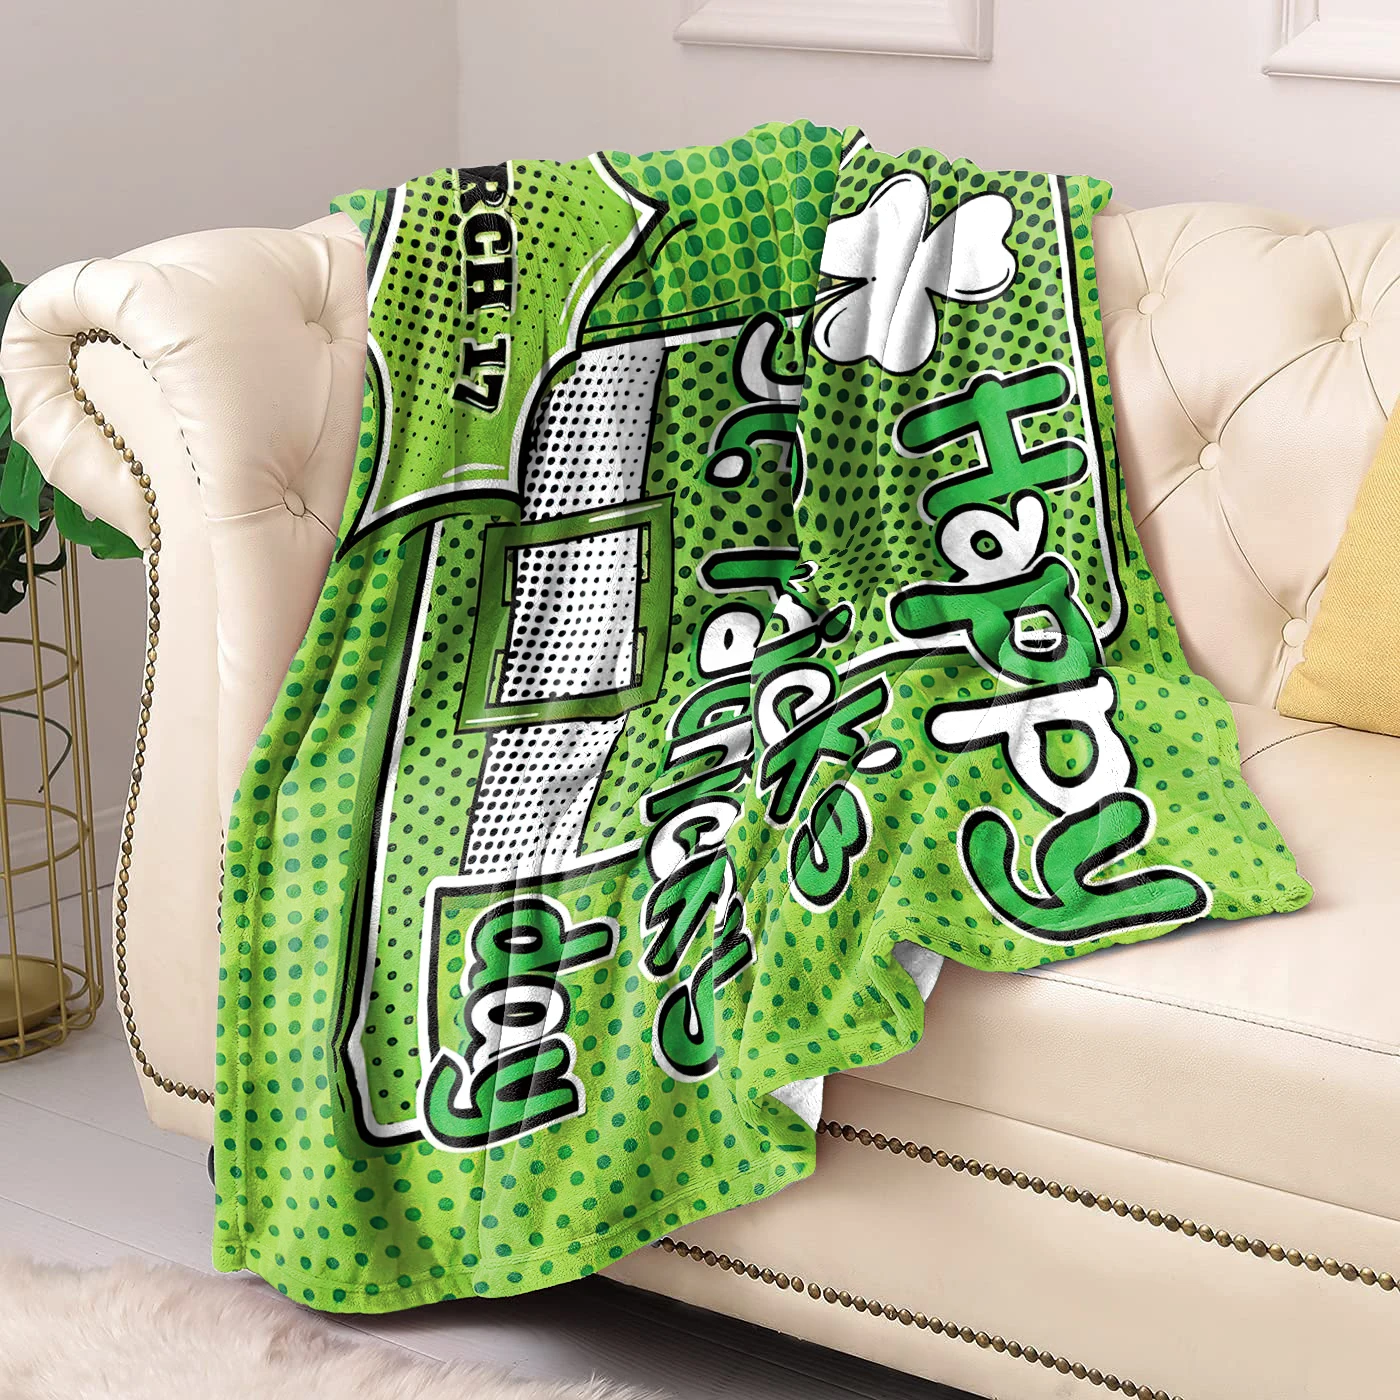 

Warm Blankets St. Patrick's Day Shamrocks Soft Flannel Bed Cover Blanket for Travel Camping Couch Sofa Fashion Home Supplies